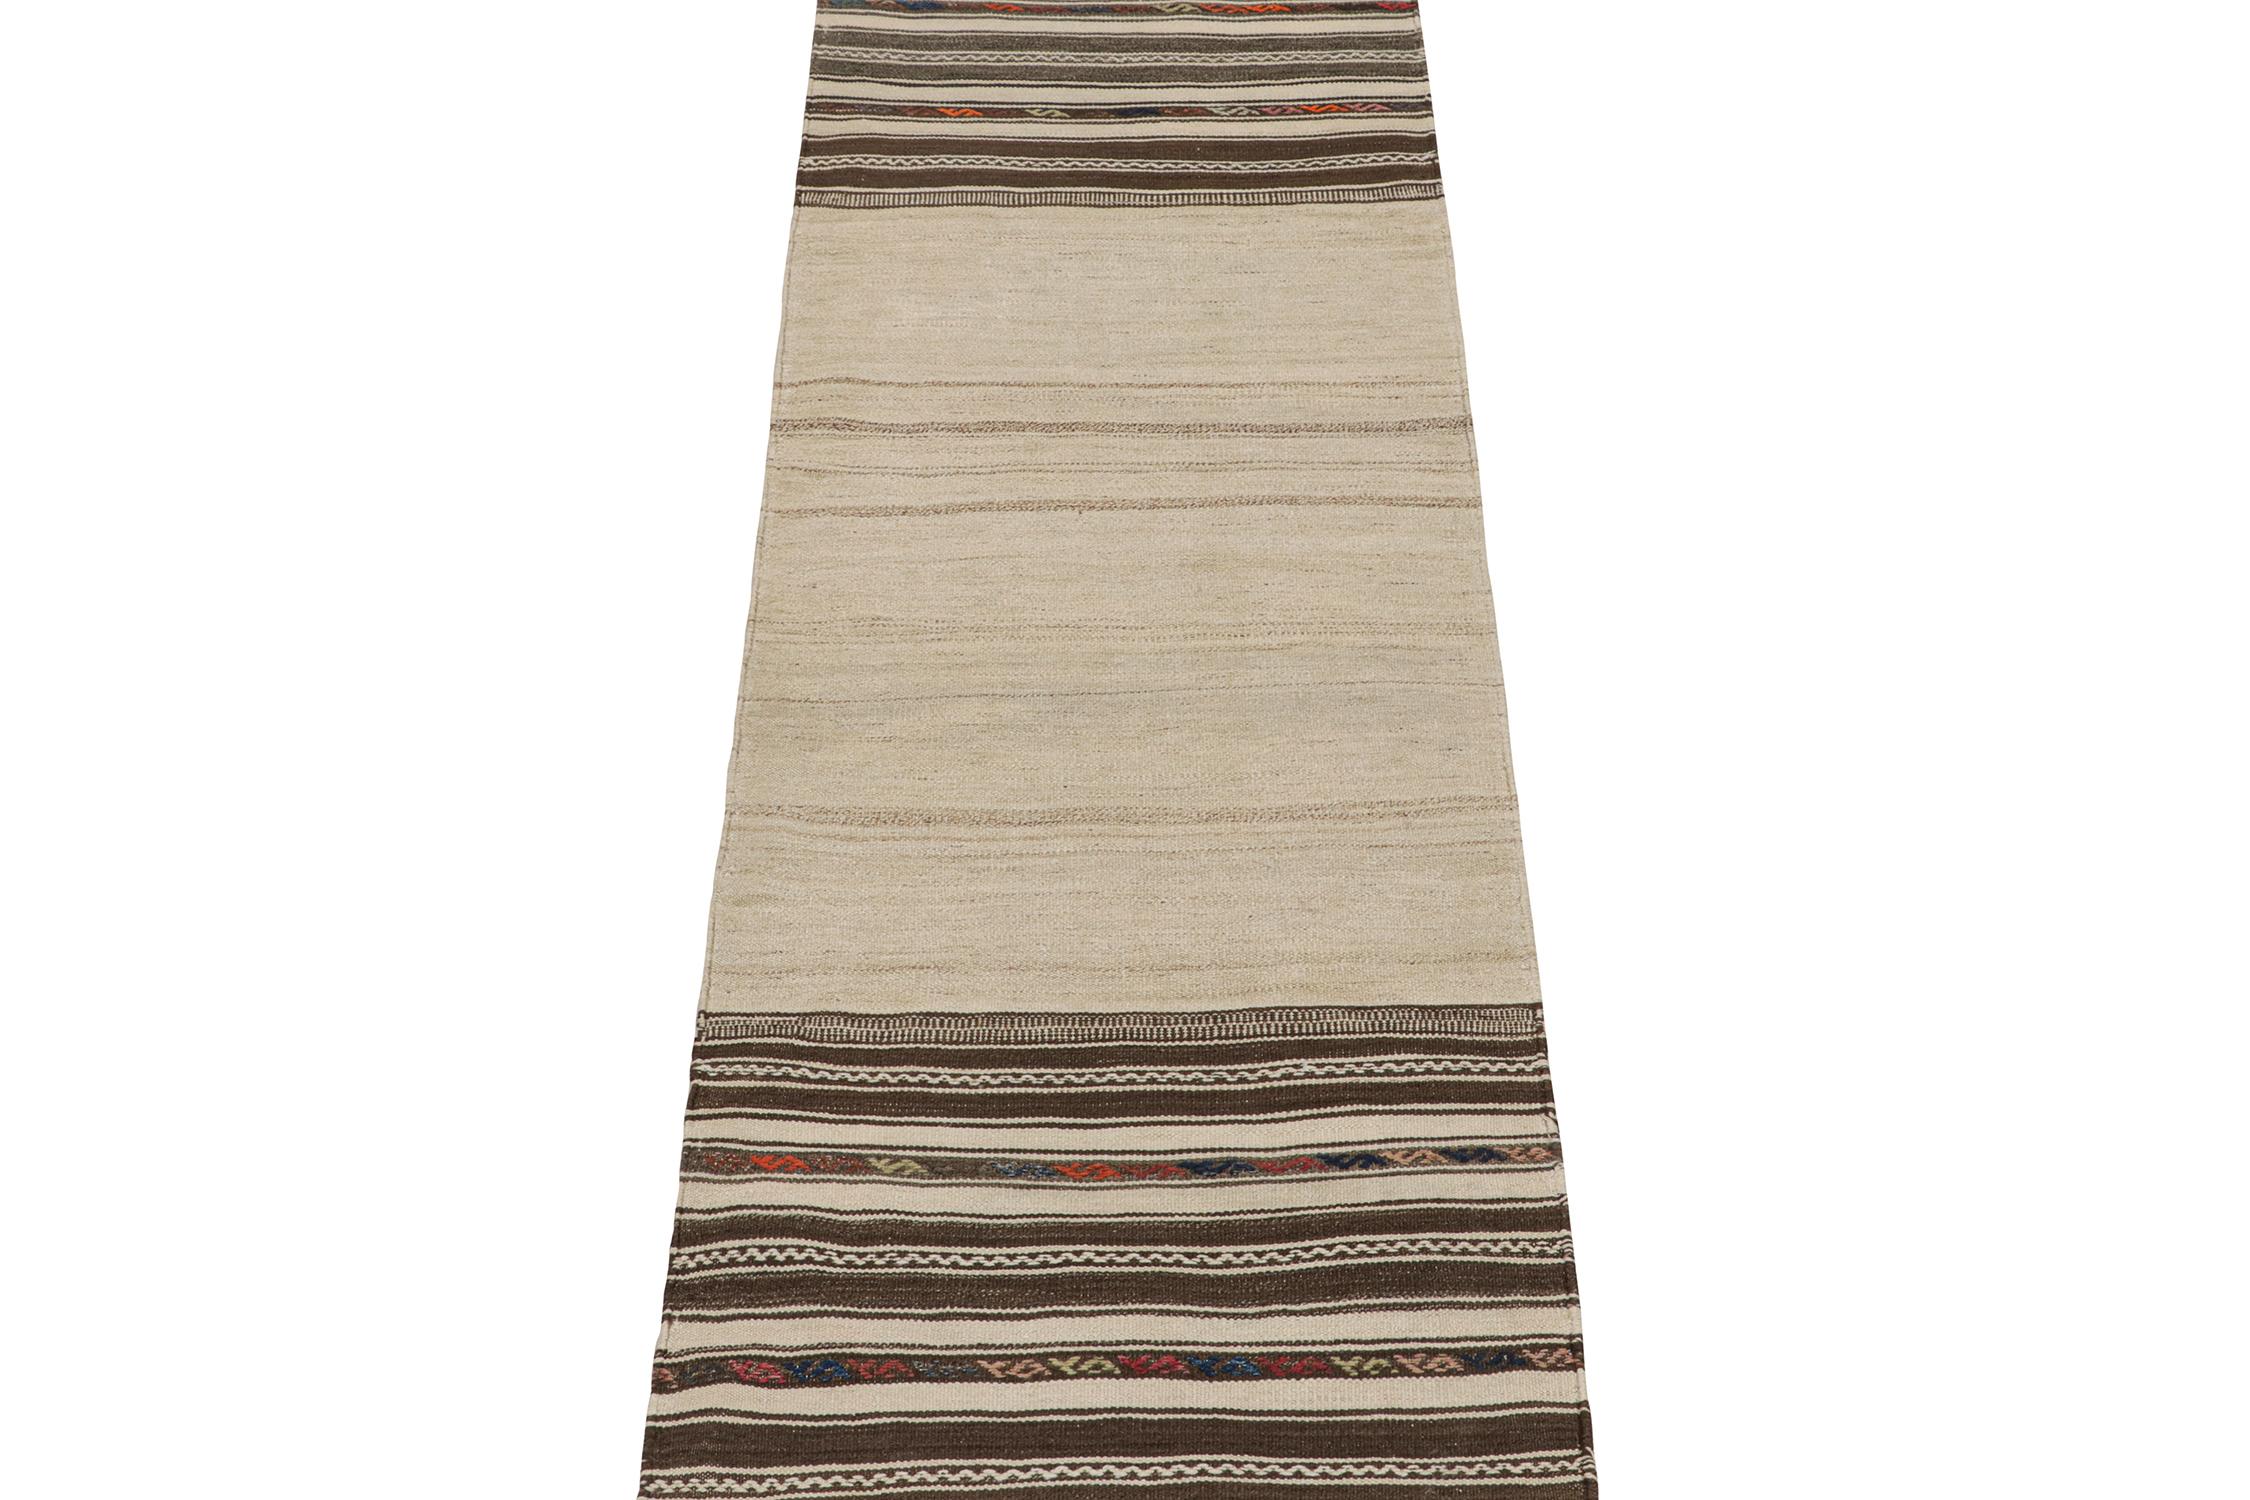 This vintage 3x10 Persian kilim is an idyllic tribal runner for its period, handwoven in wool circa 1950-1960.

Further on the Design:

A beige field unfolds to chocolate brown borders with stripes and embroidered geometric patterns from end to end.